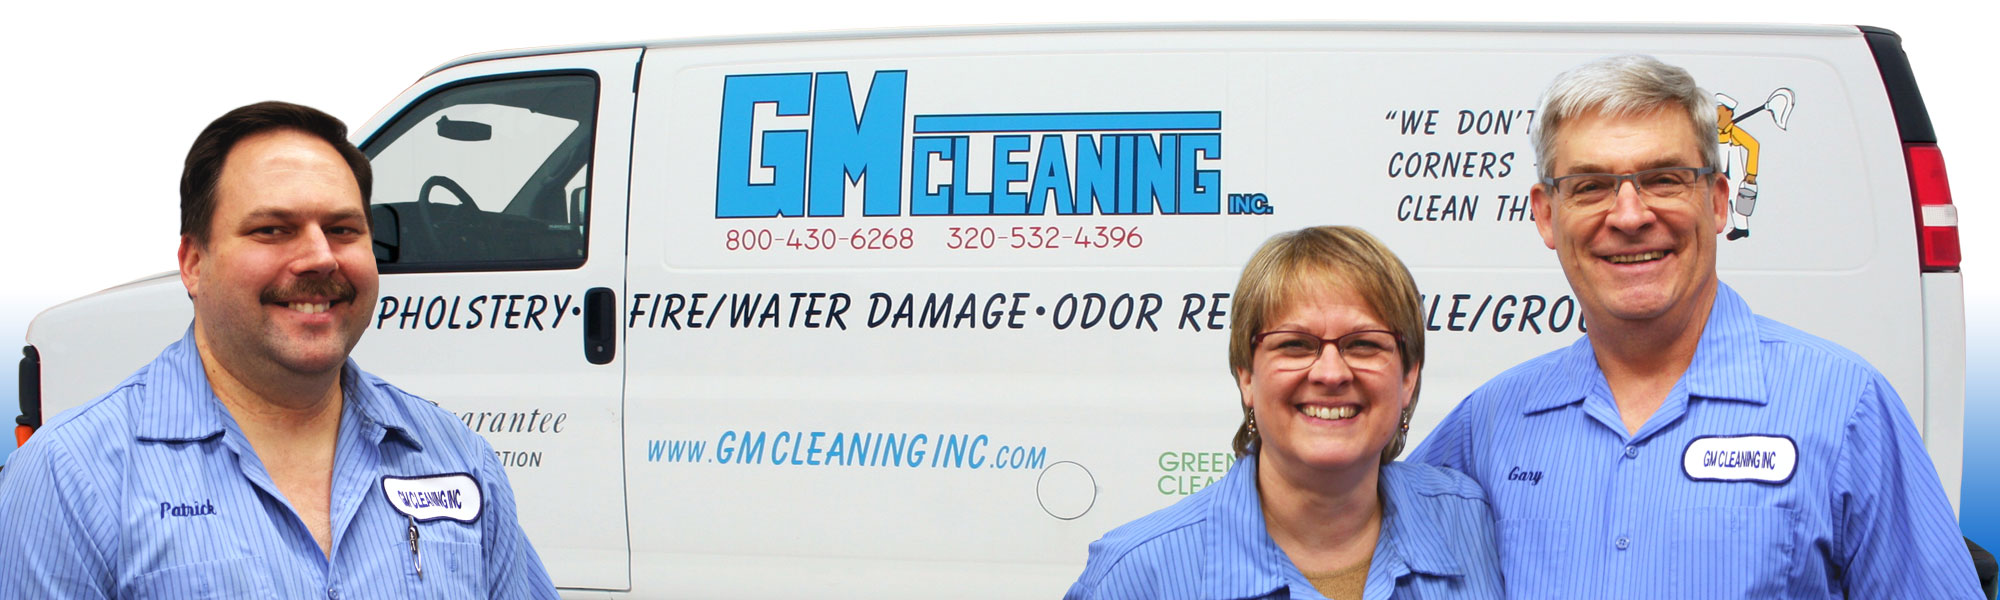 GM Cleaning Inc